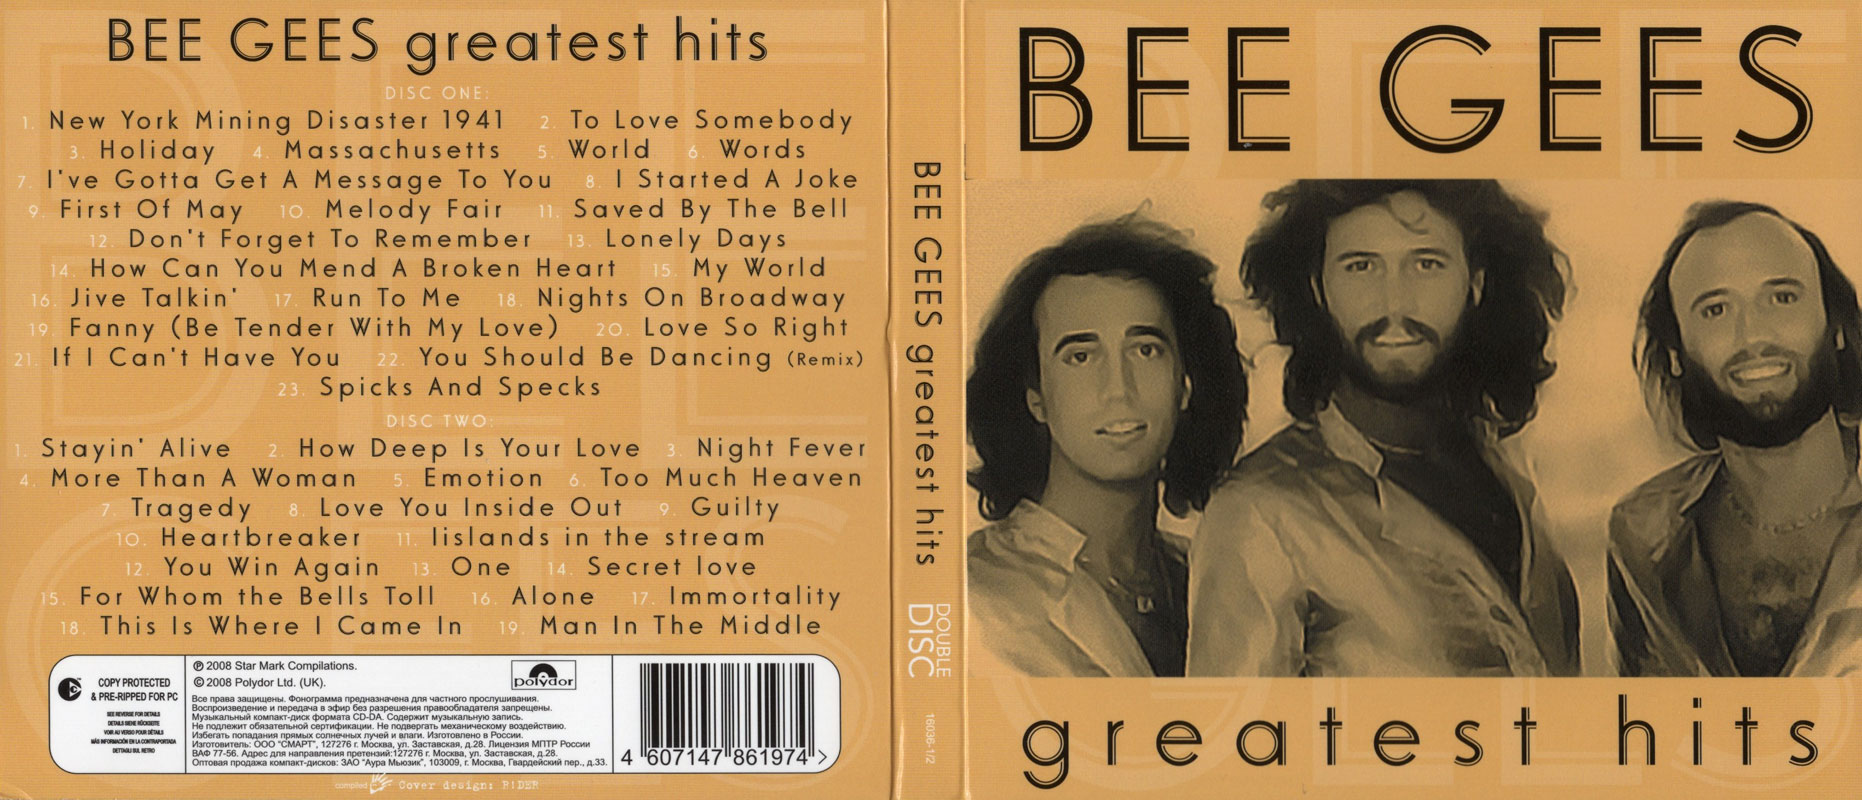 bee gees greatest hits kickass torrent